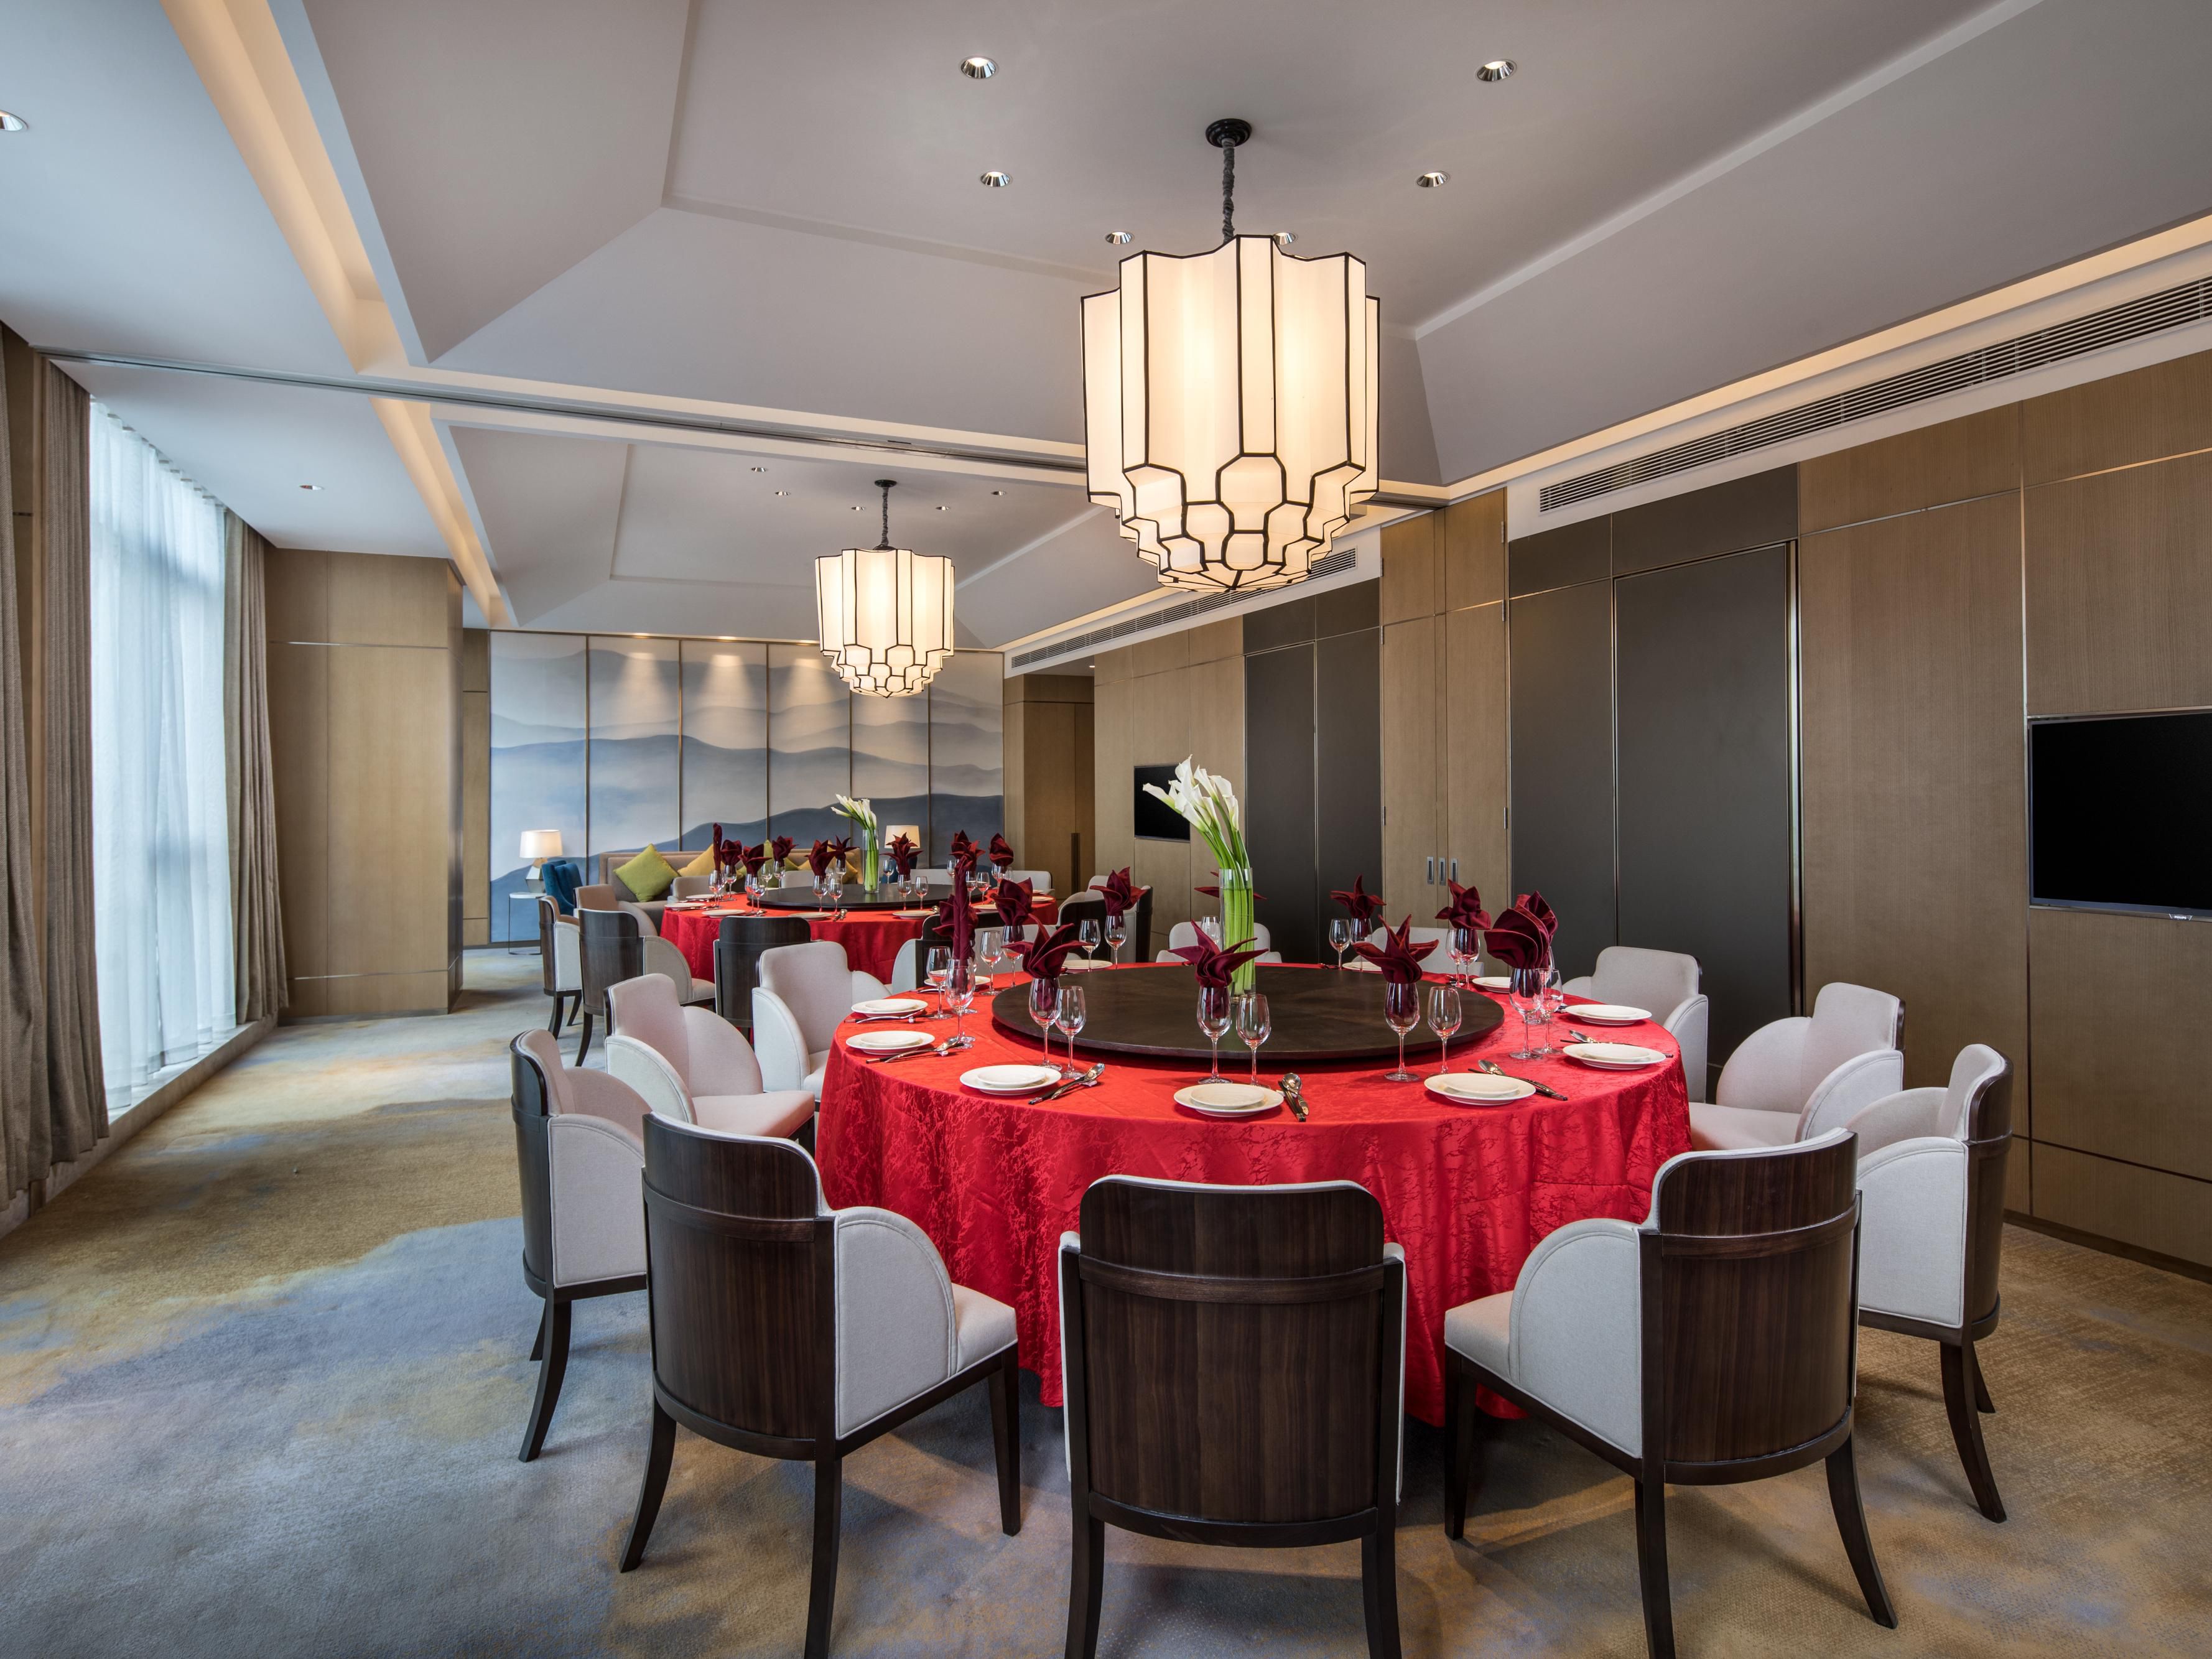 Located on the hotel third floor, it provides Huaiyang cuisine and Nanjing specialties. There are 5 elegant private rooms in the restaurant, which is a good place for guests to enjoy delicious food with their family and friends.